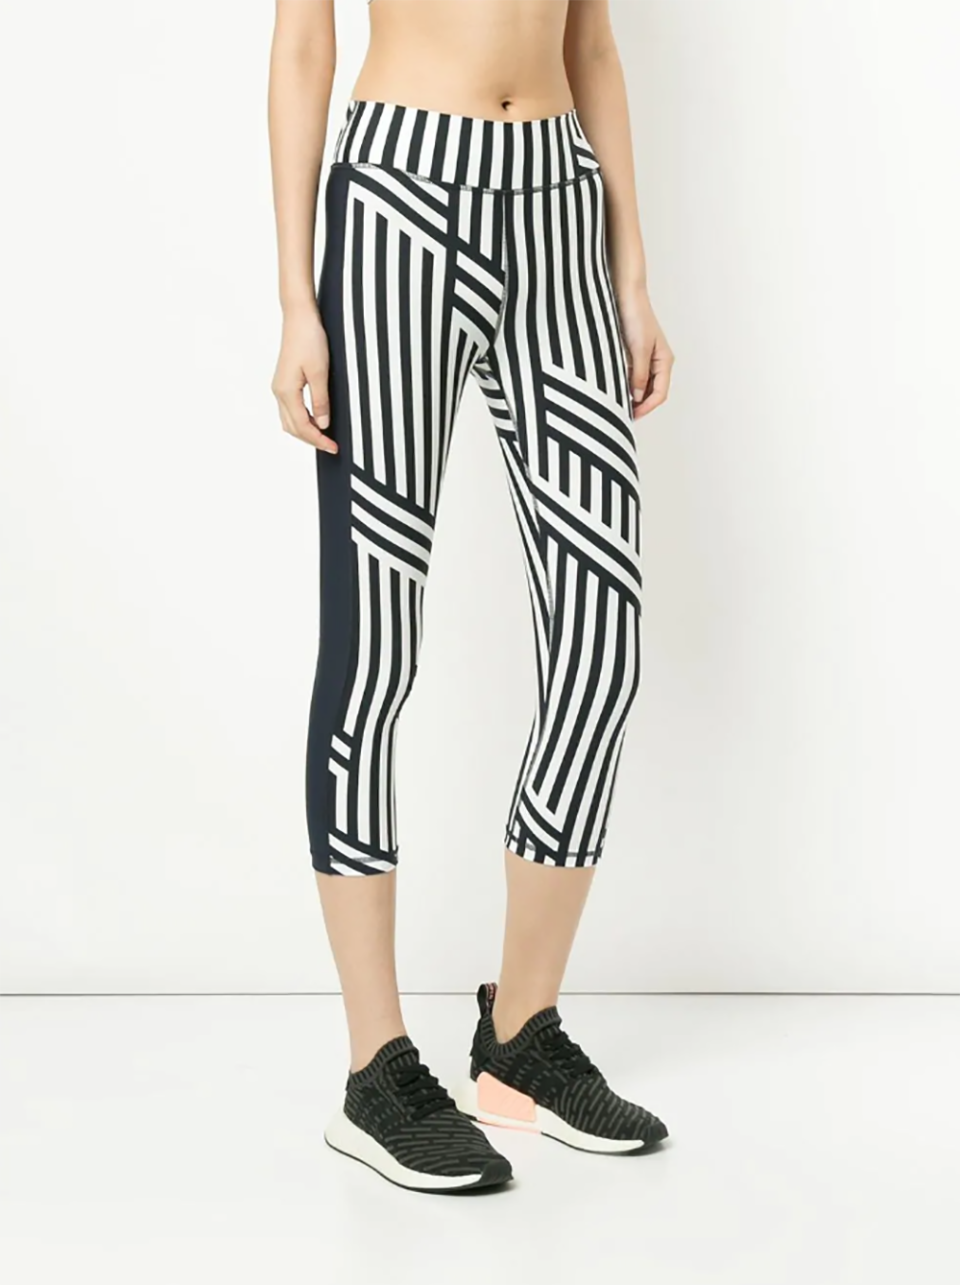 The Upside Striped Cropped Leggings, $43